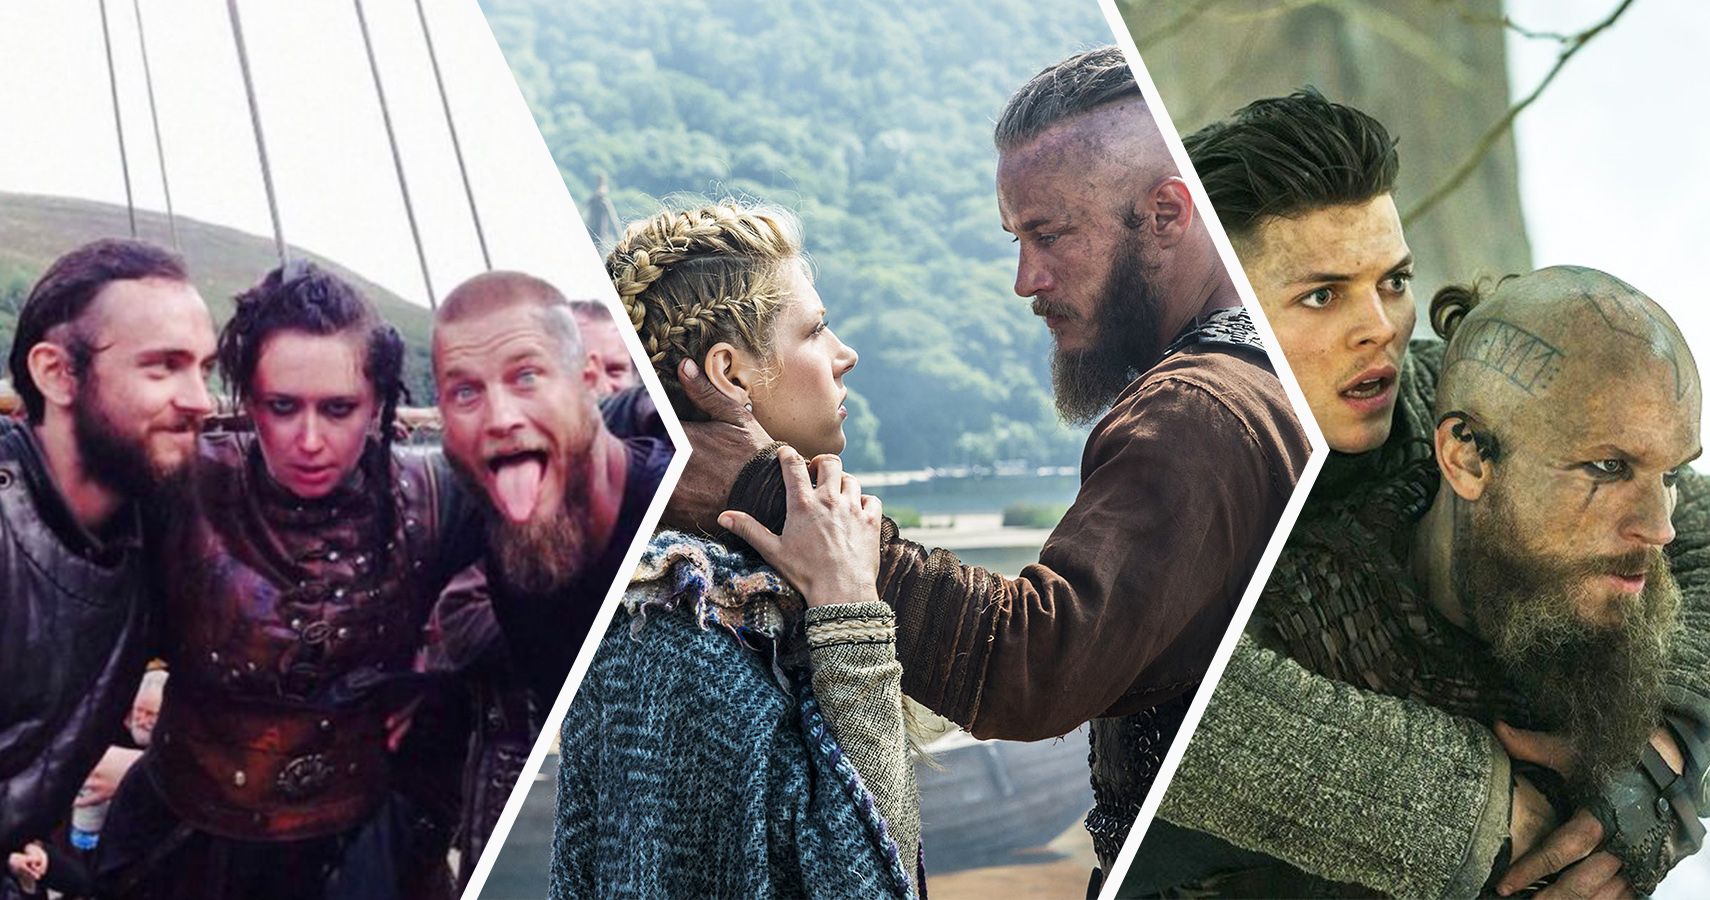 Vikings: 7 Surprising Facts About The Real Bjorn Ironside – Page 6